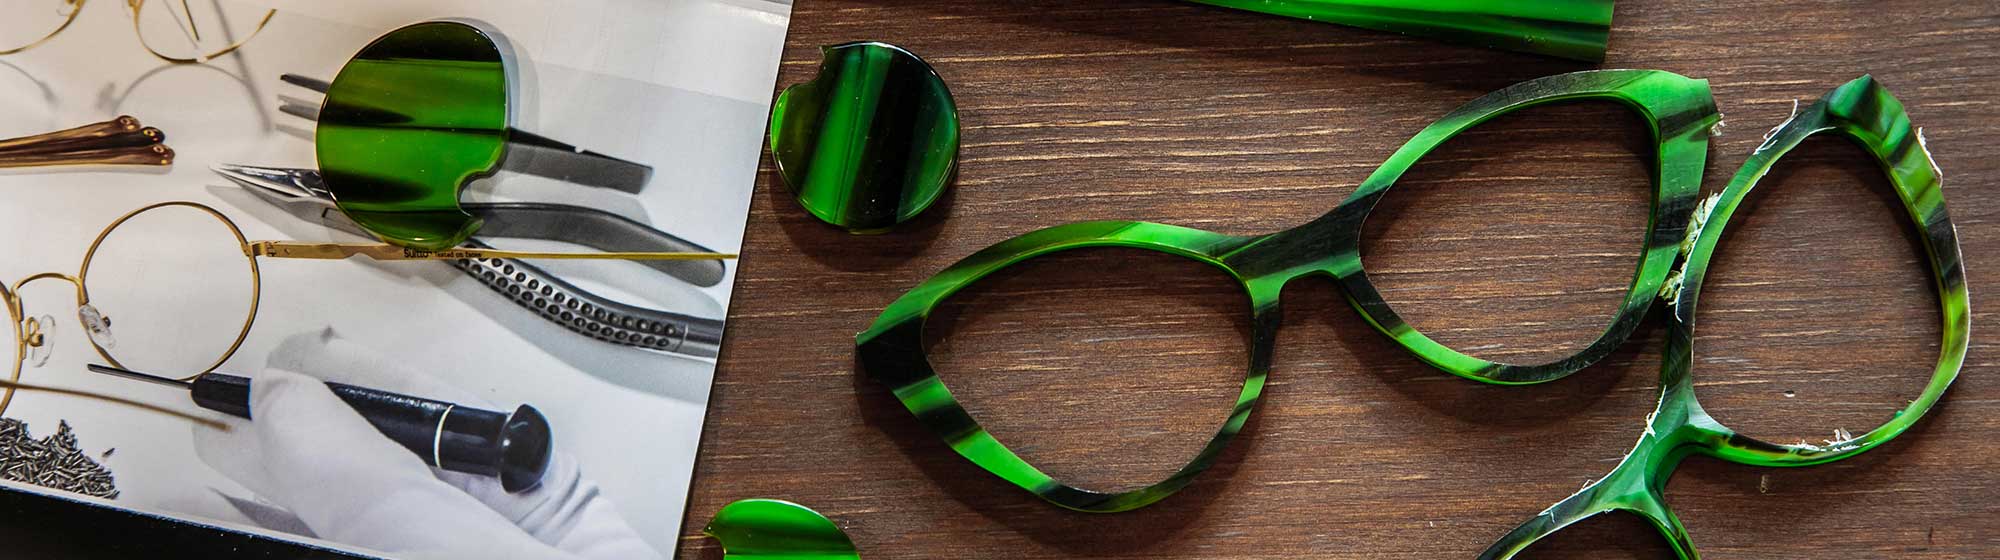 Creation of green scale glasses